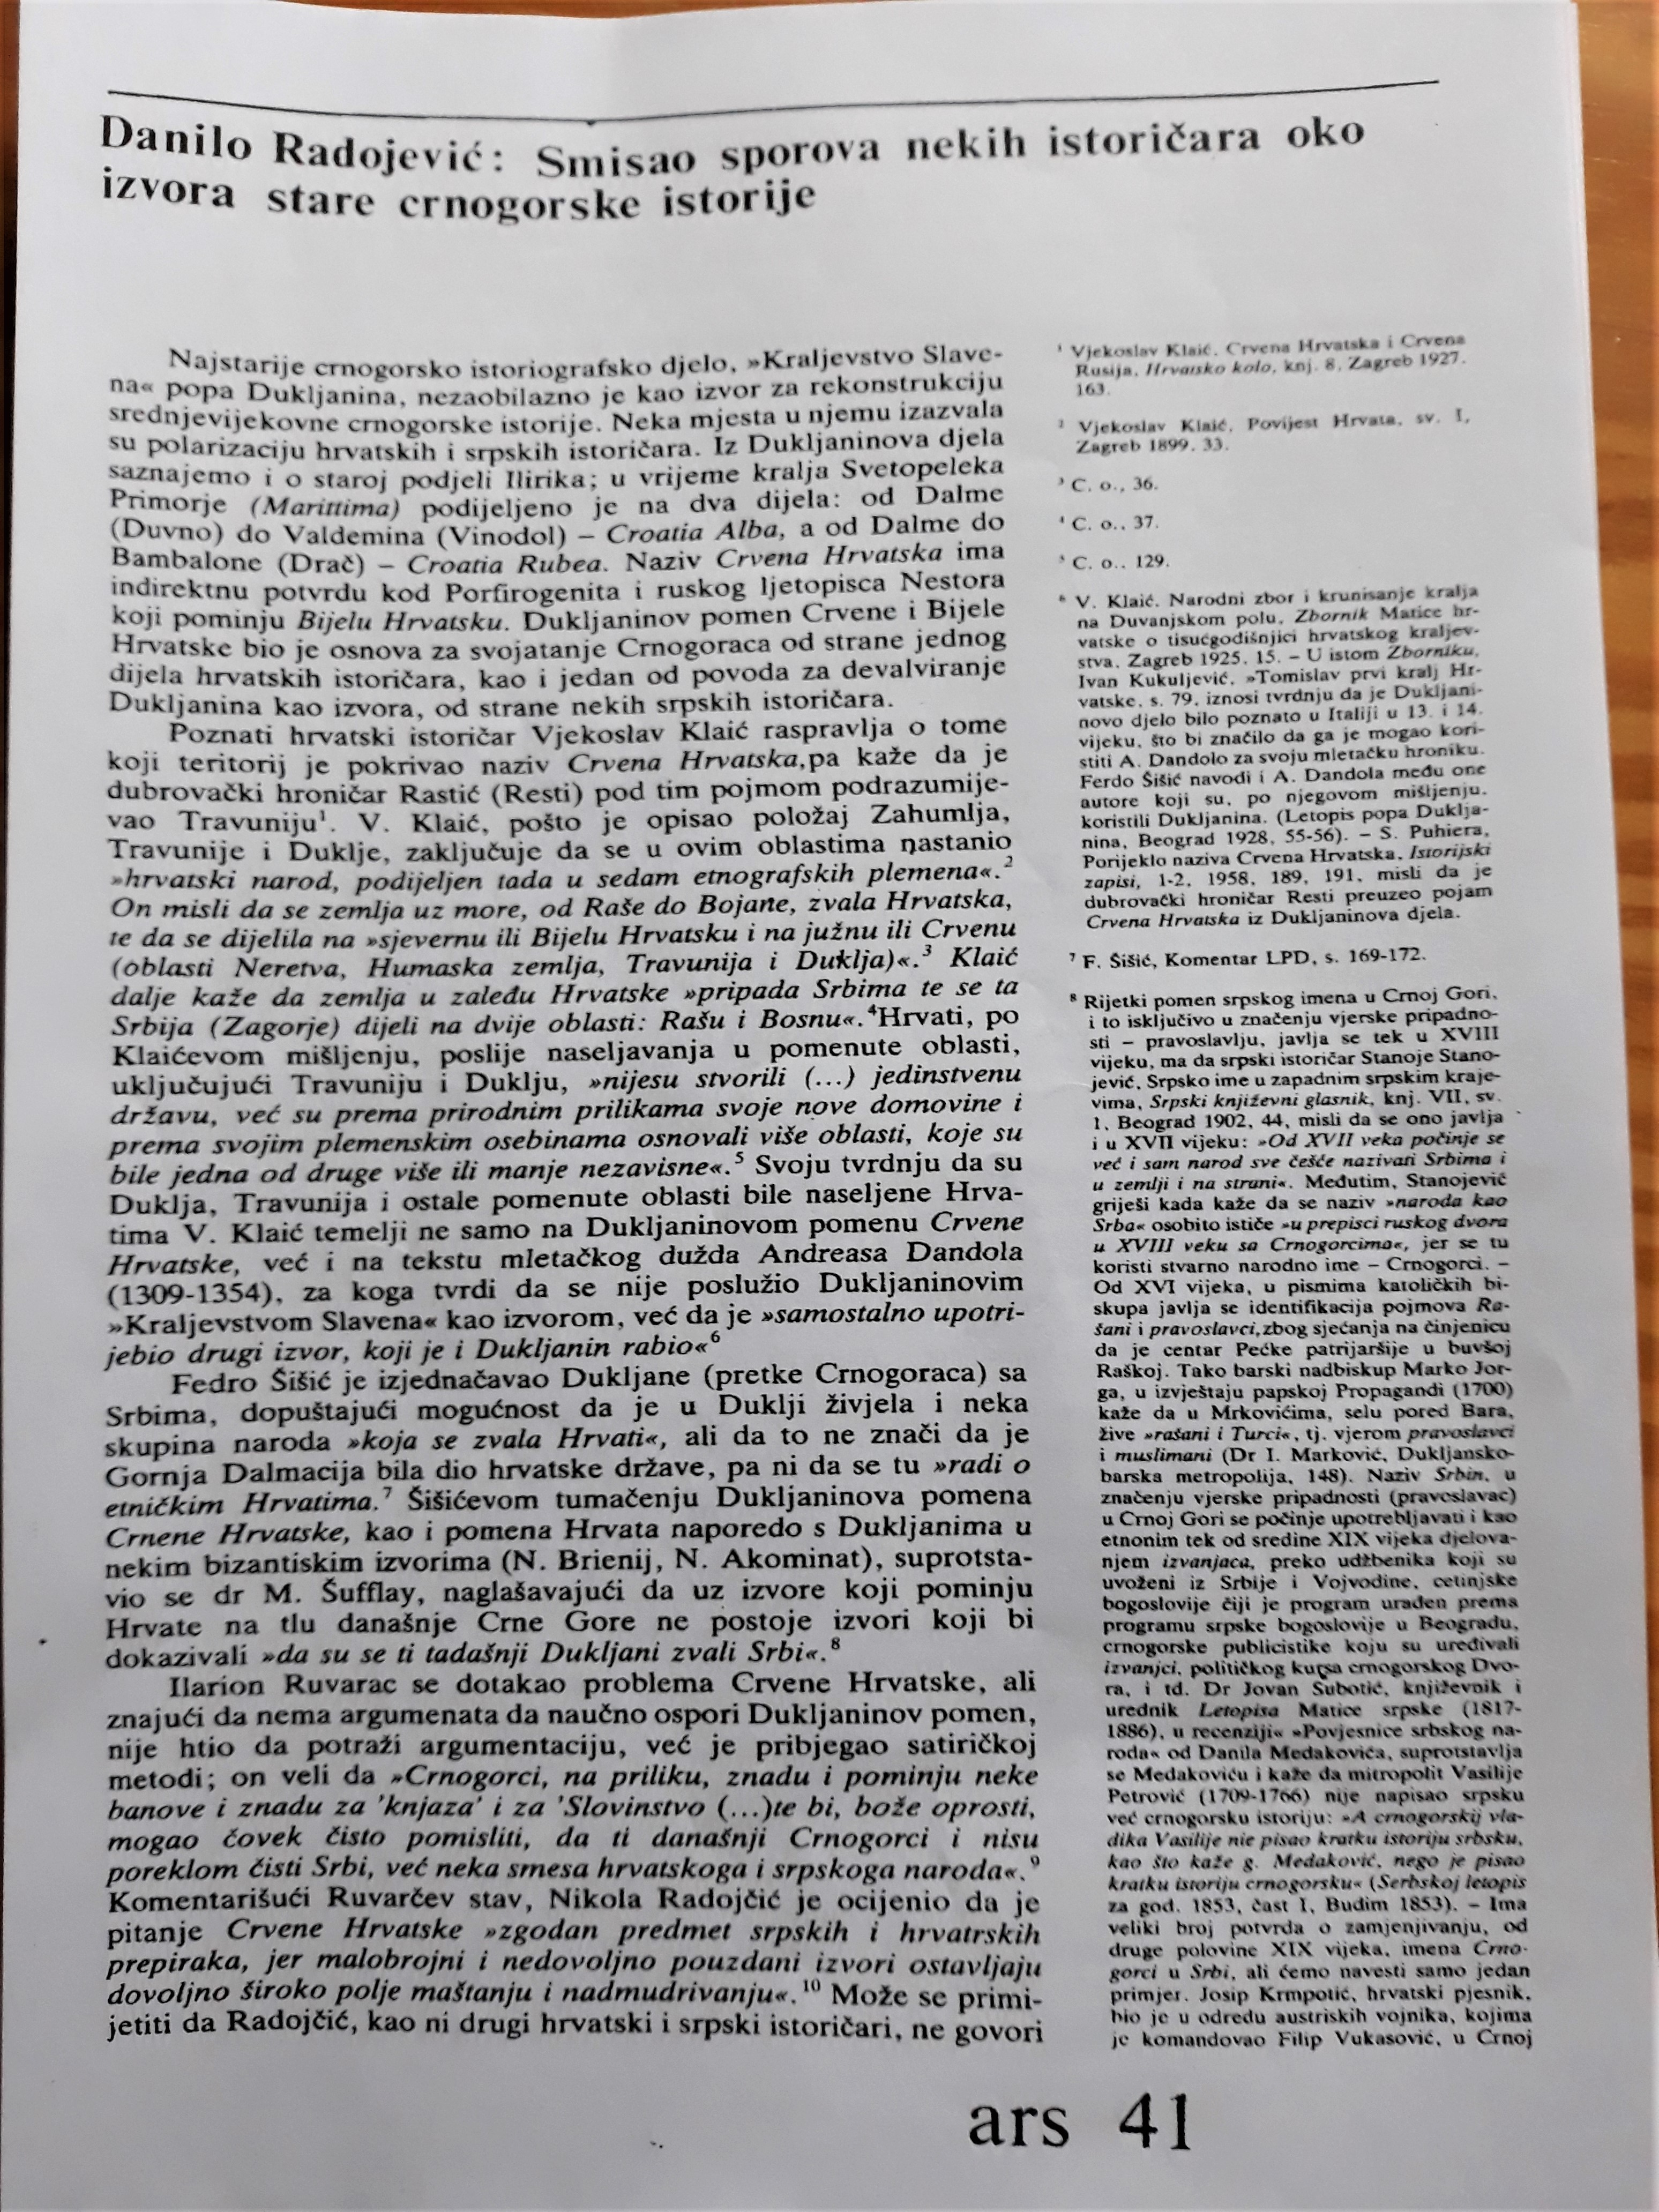 Radojević Danilo. “The Point of the Disputes Between Historians about Sources on Old Montenegrin History”, in Serbian, 1987. Journal Article